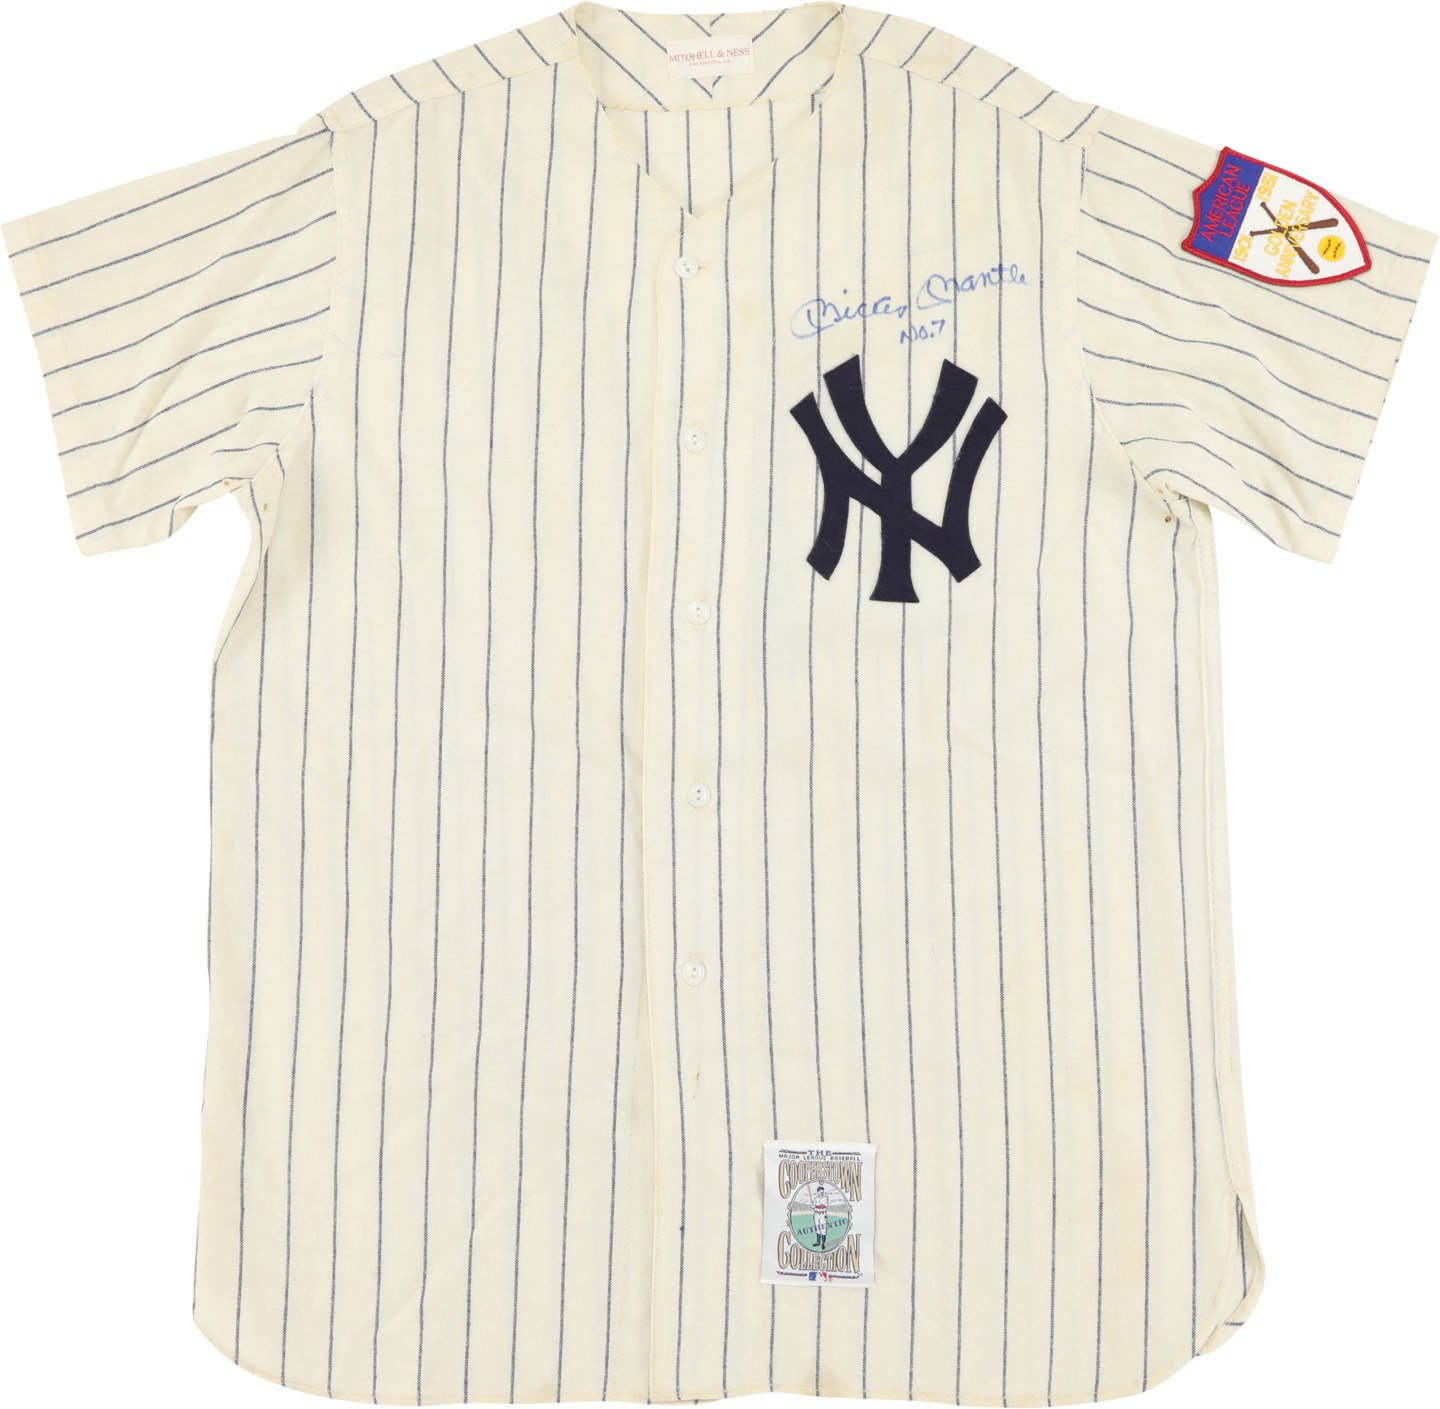 - Mickey Mantle "No. 7" Signed 1951 Mitchell and Ness New York Yankees Jersey